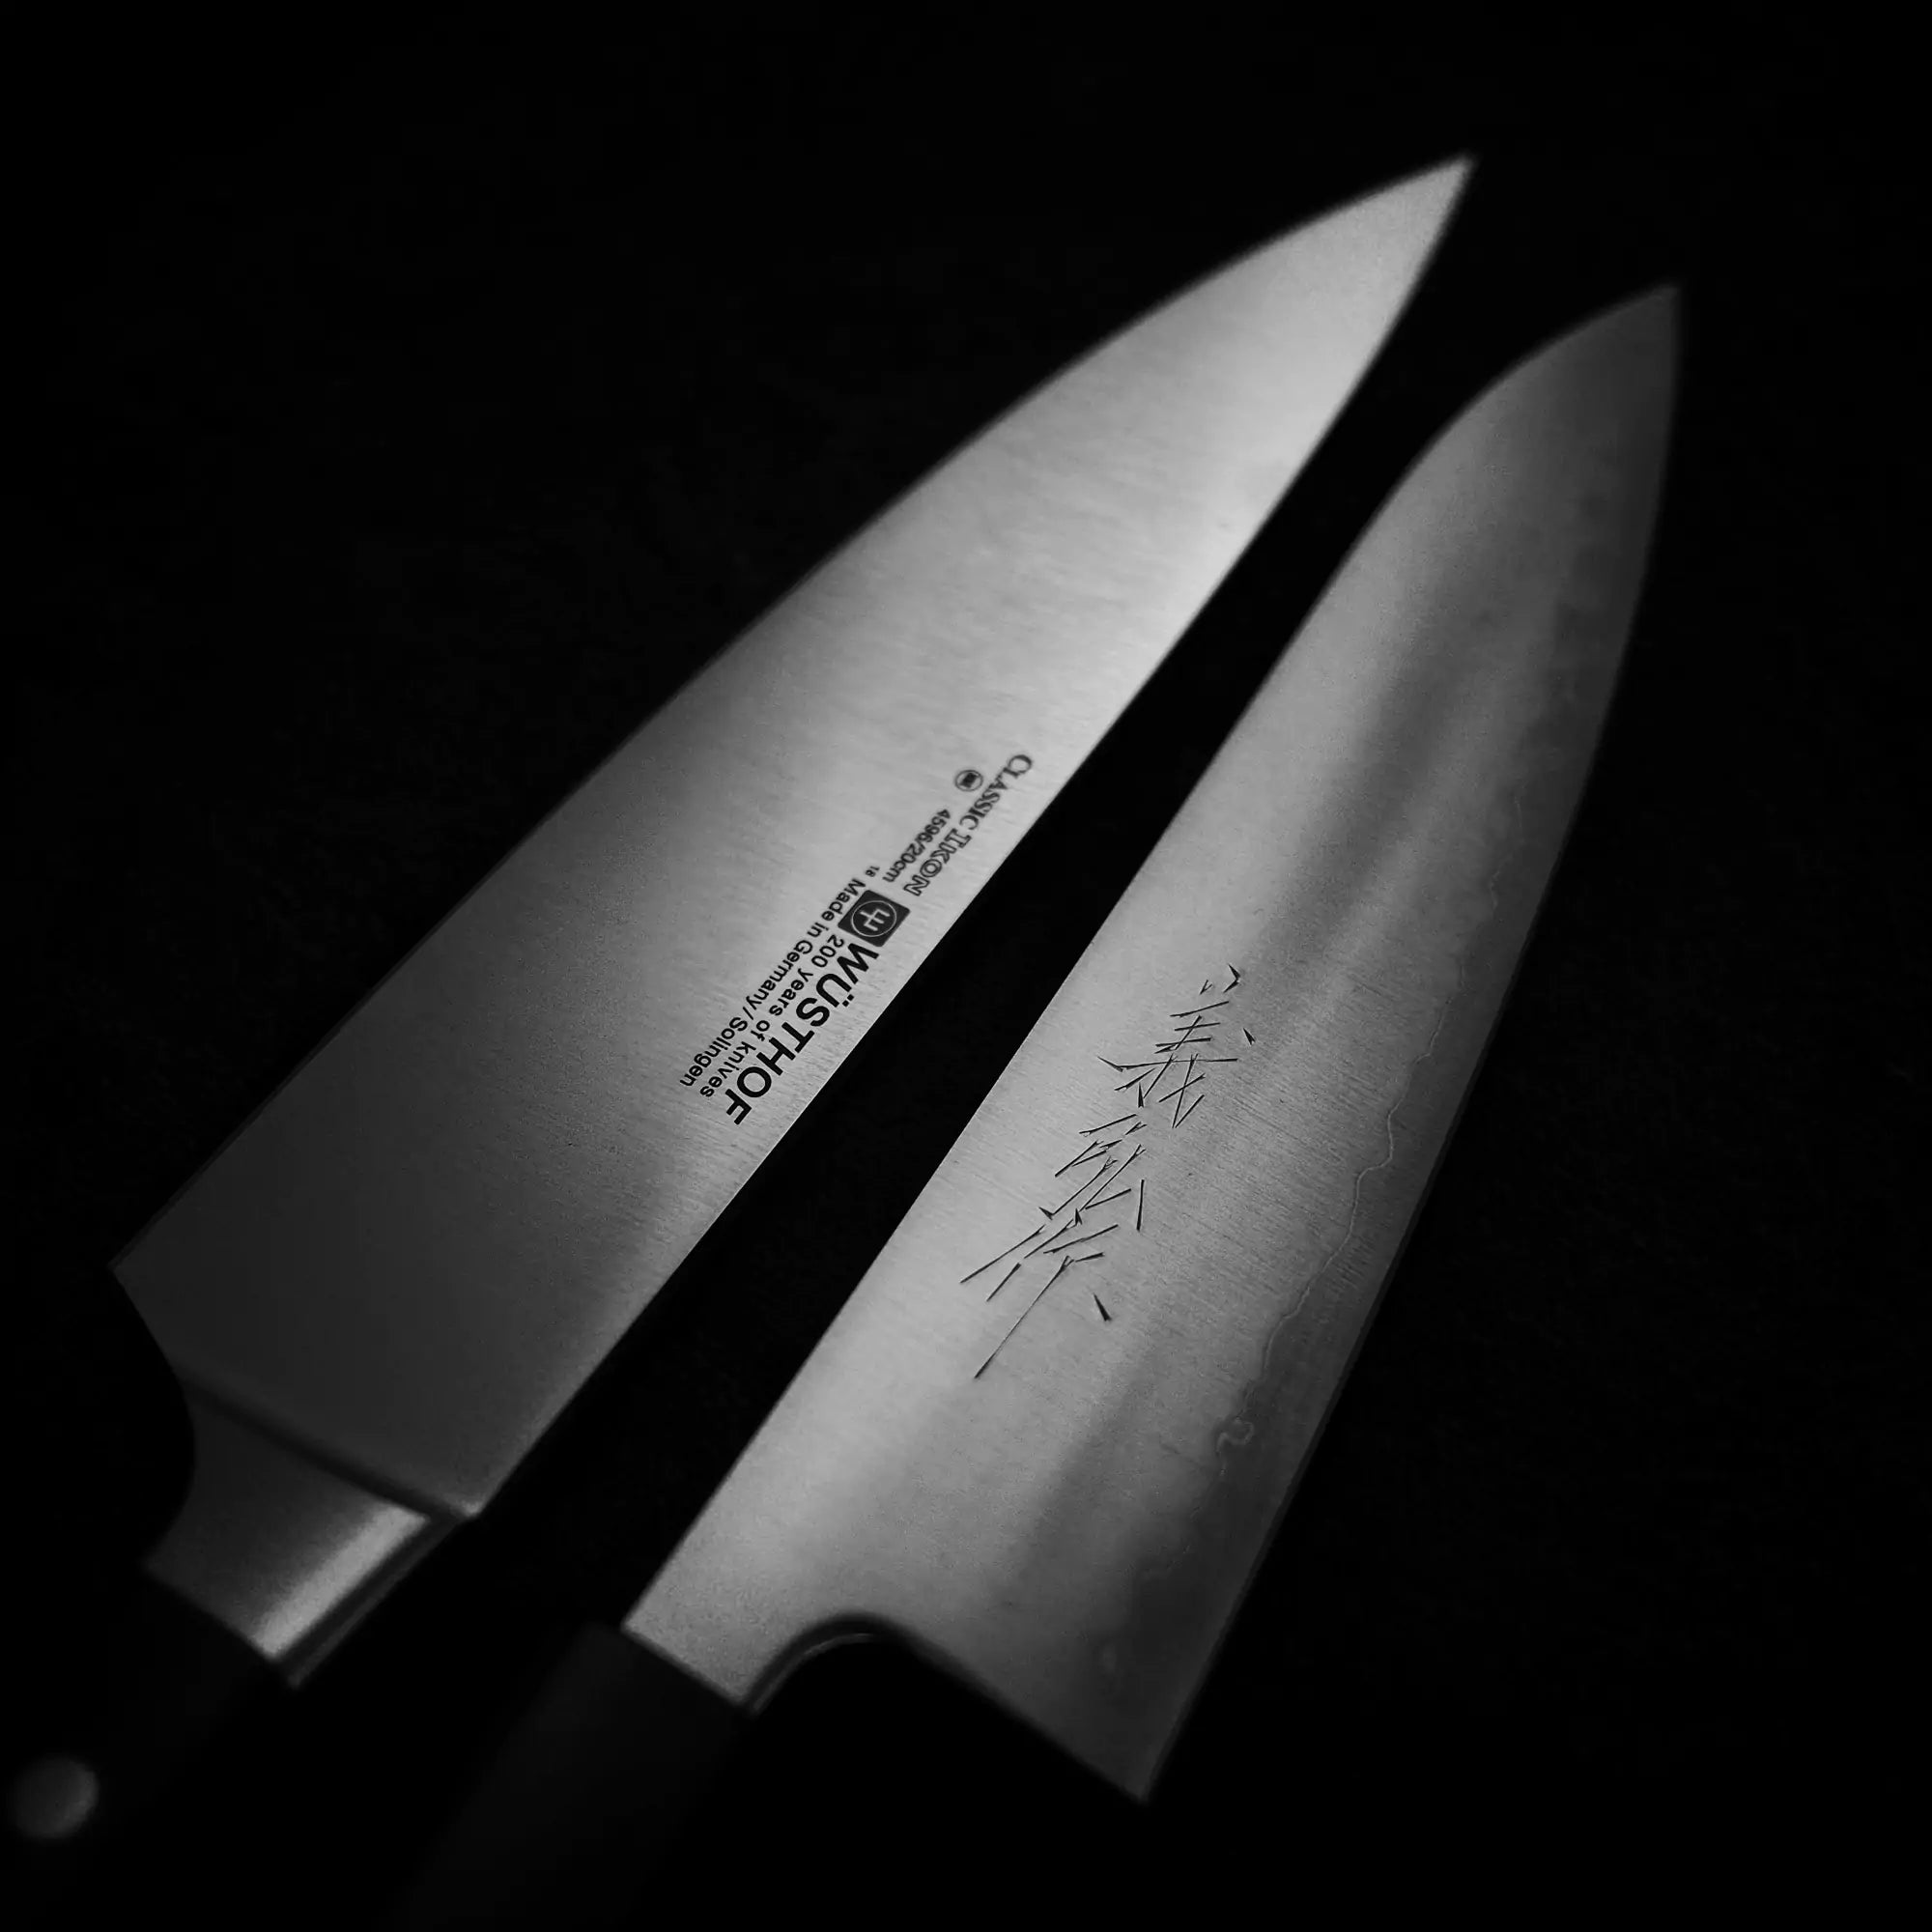 Black and white close-up image of two chef's knives against a dark background. On the left is a Western chef's knife with inscriptions and branding, while on the right is a Japanese Gyuto chef's knife with distinct kanji characters etched on the blade.